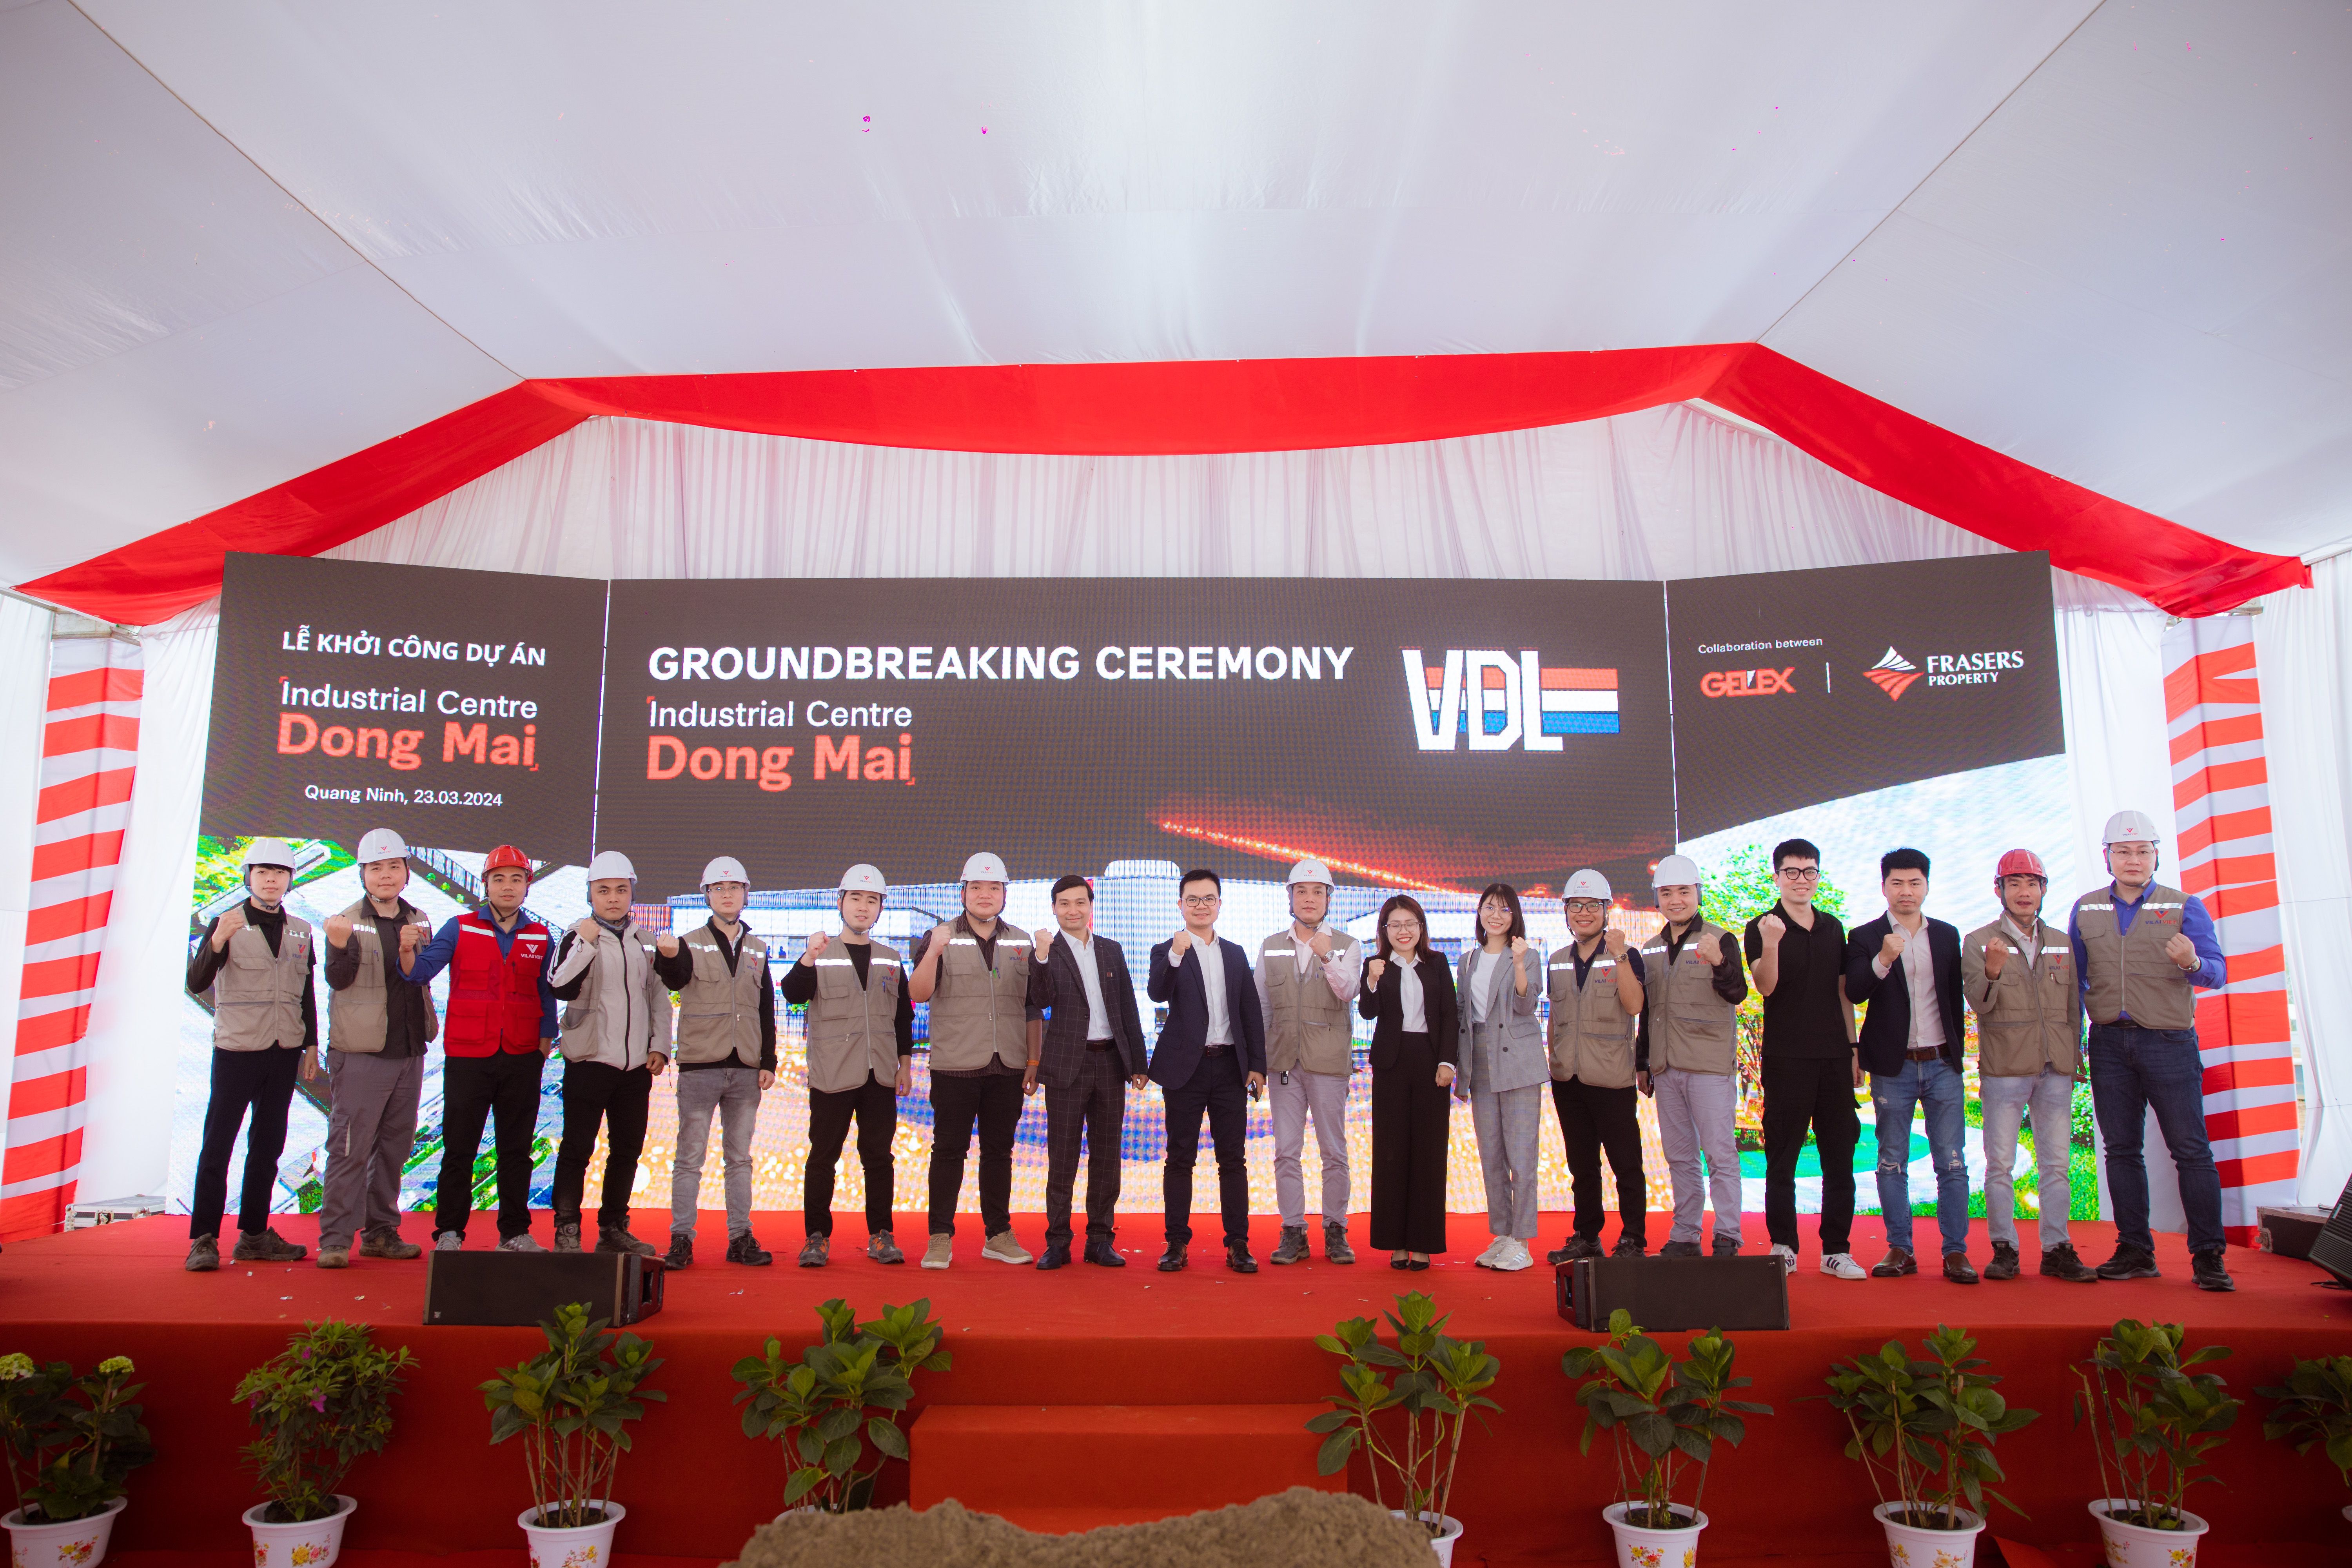 Industrial Centre Dong Mai officially started construction